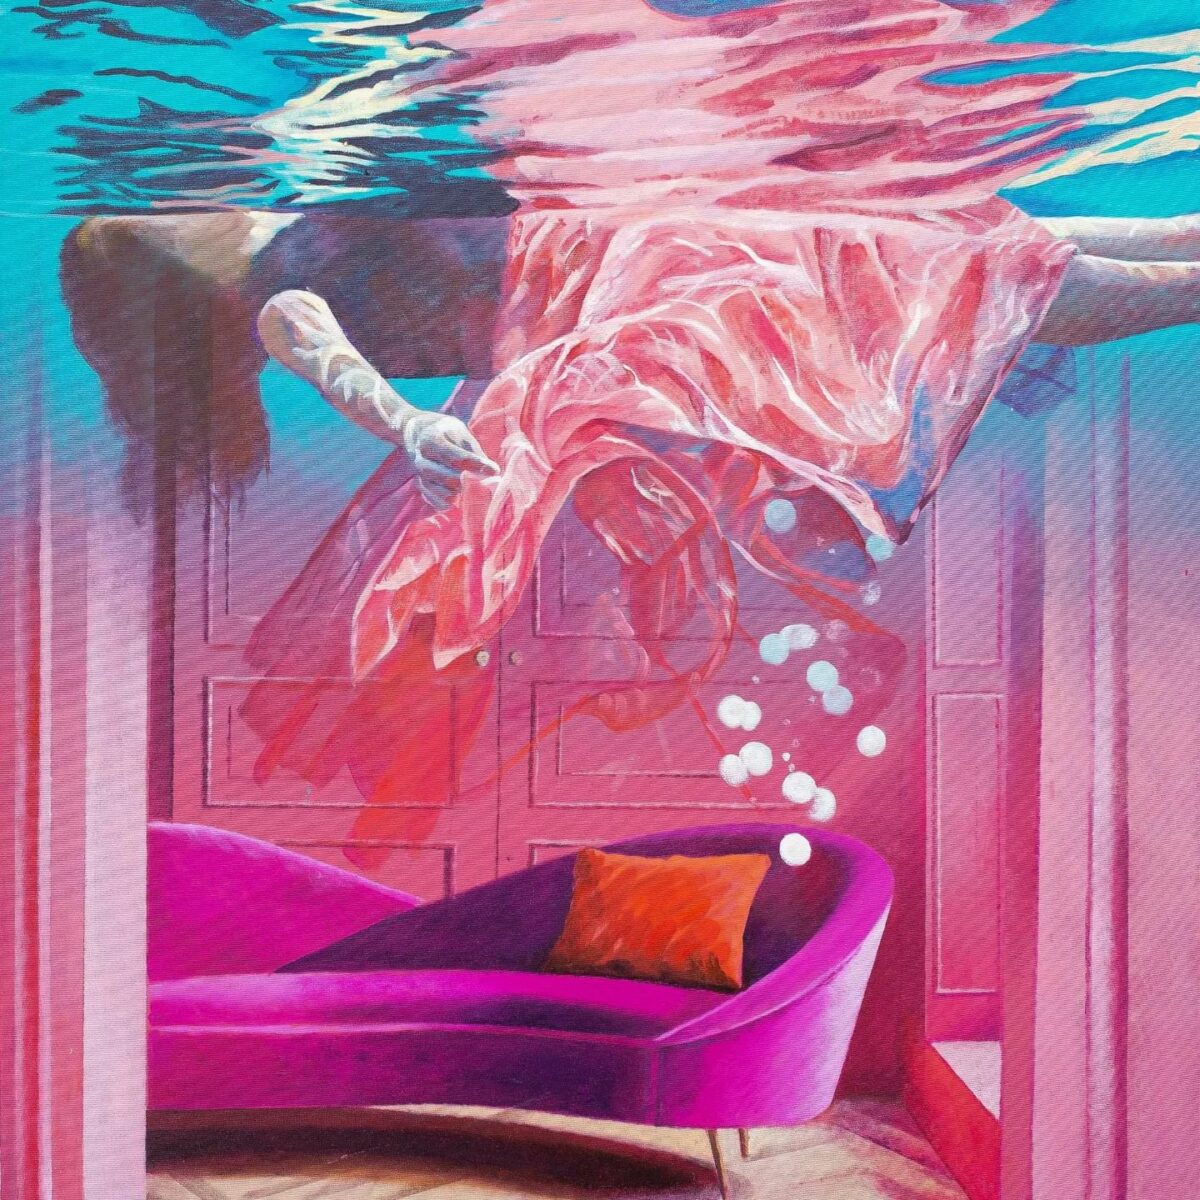 Dream Of Freedom Breathtaking Surrealistic Paintings Of Figures Floating In Flooded Rooms By Ivana Zivic 6